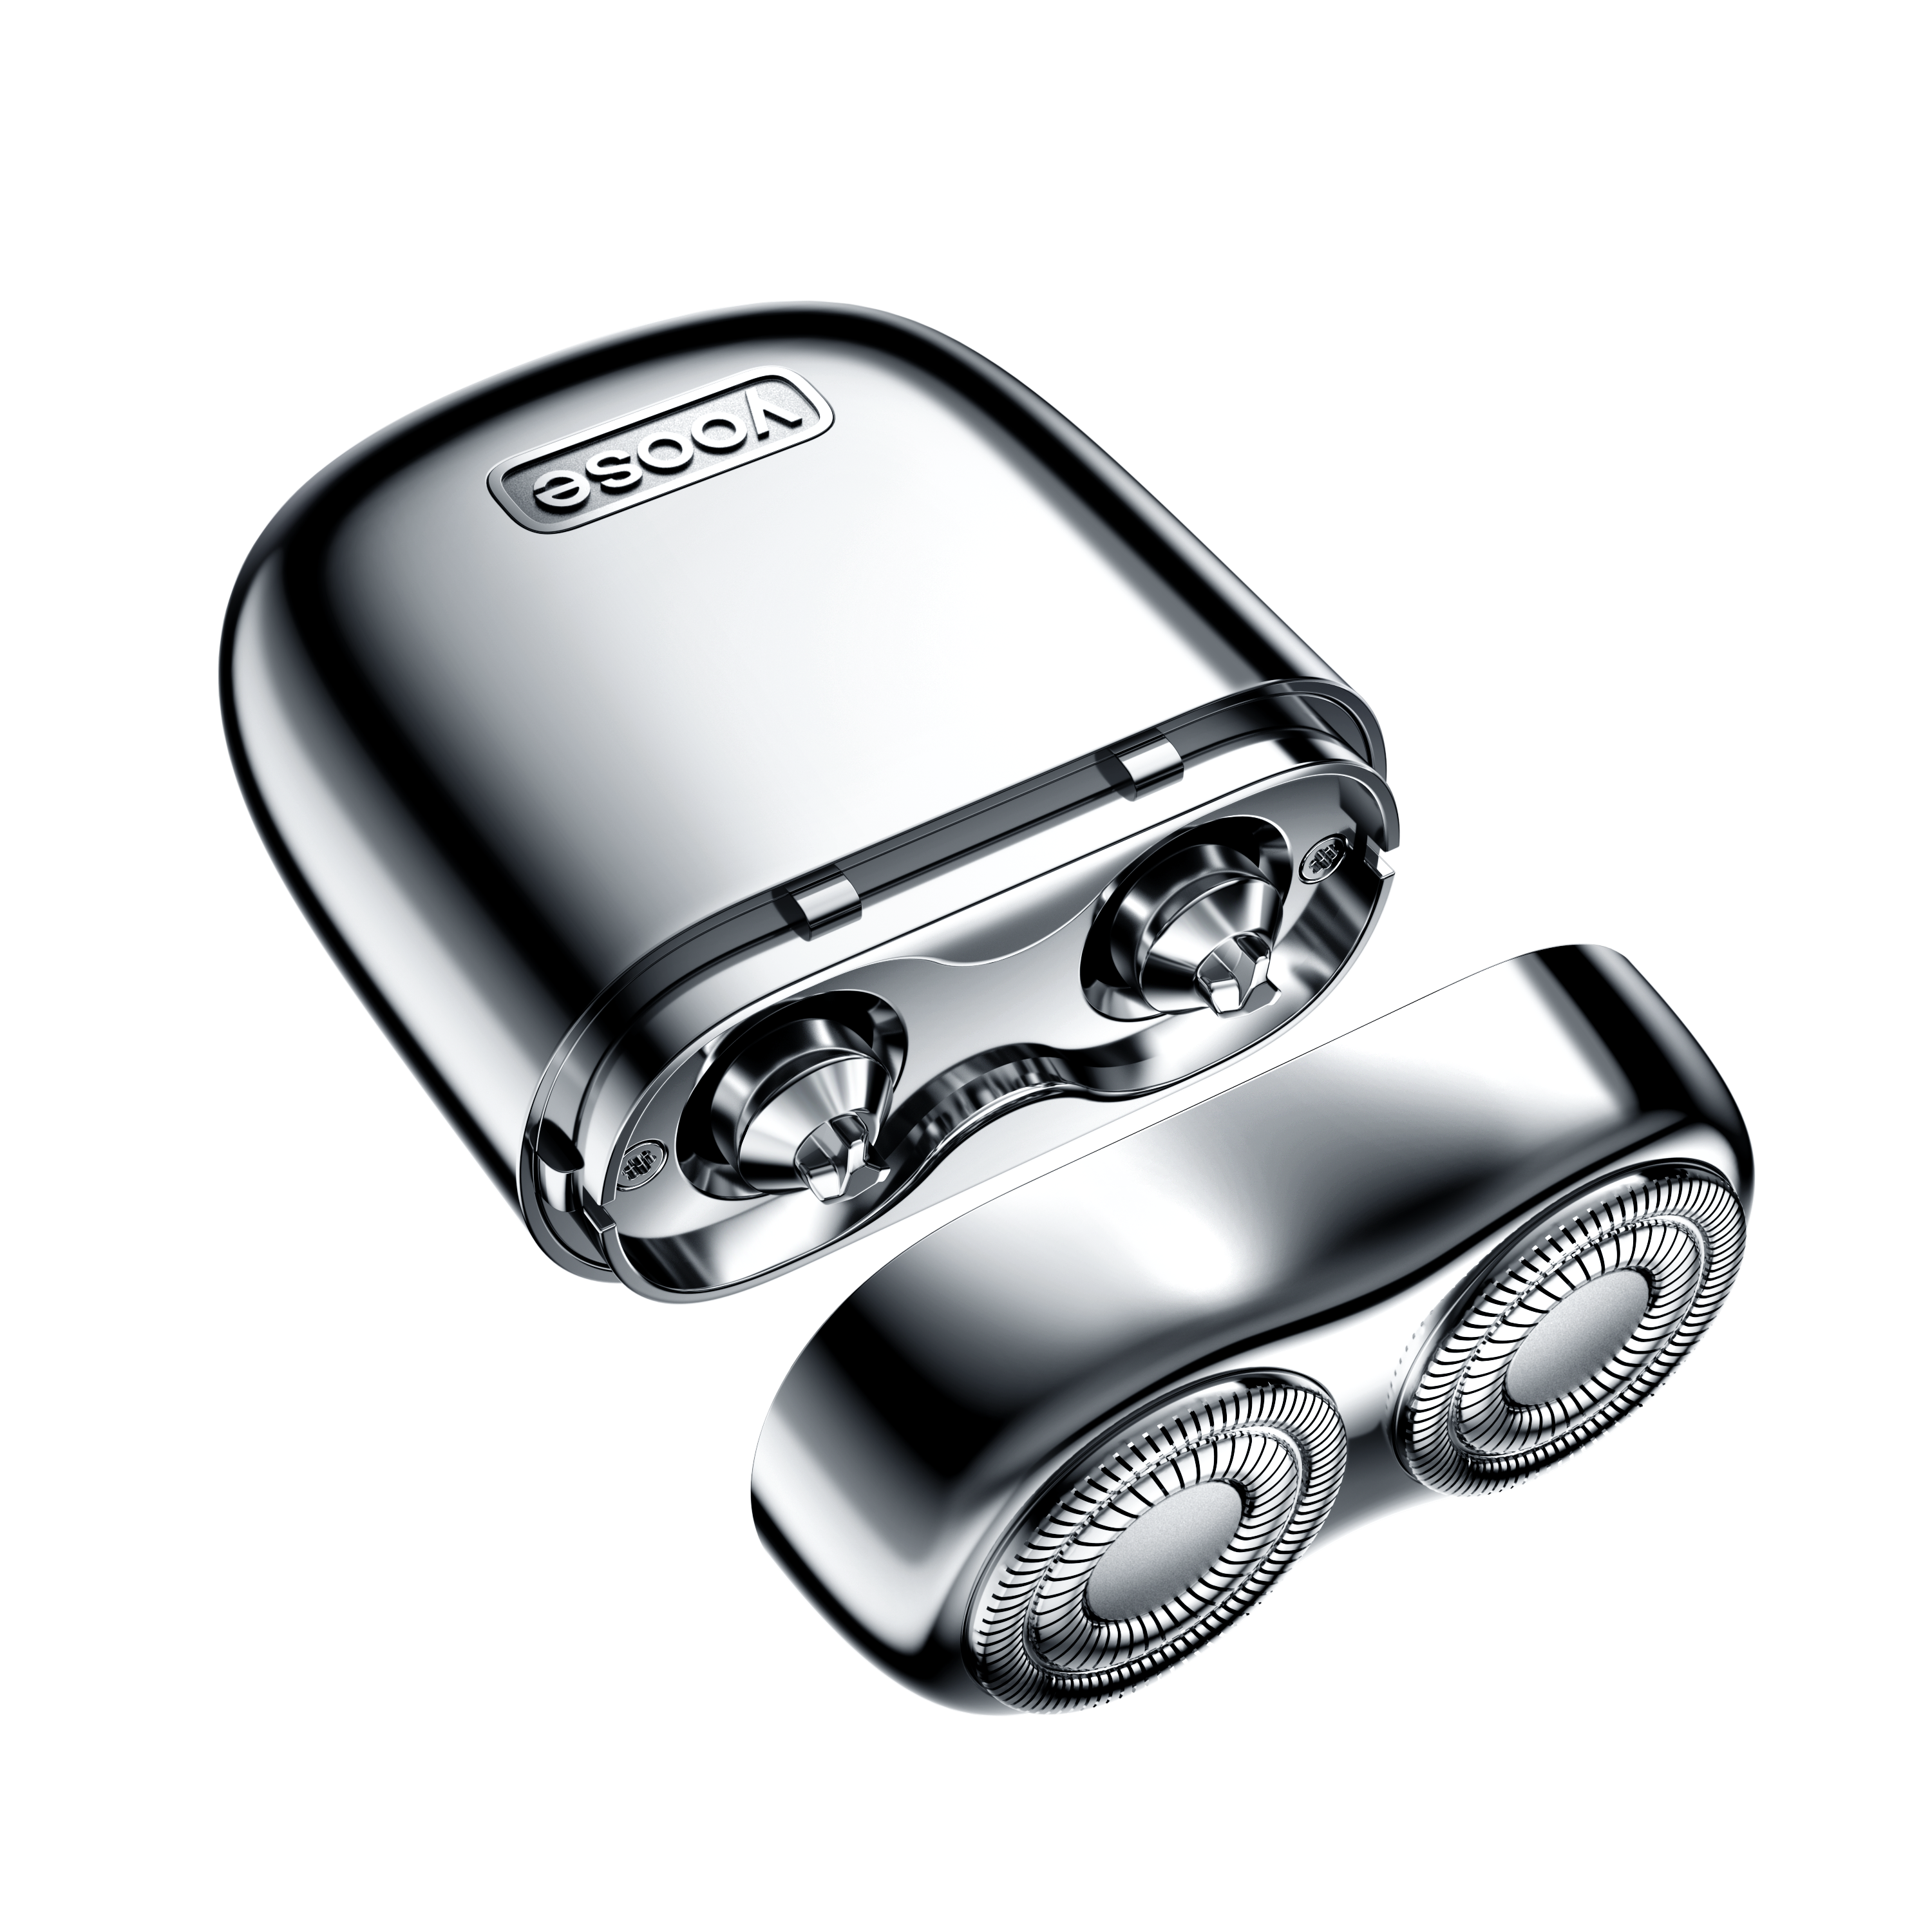 yoose mini rotary shaver equipped dual motors for fast shaving and magnetic technology for easy cleaning